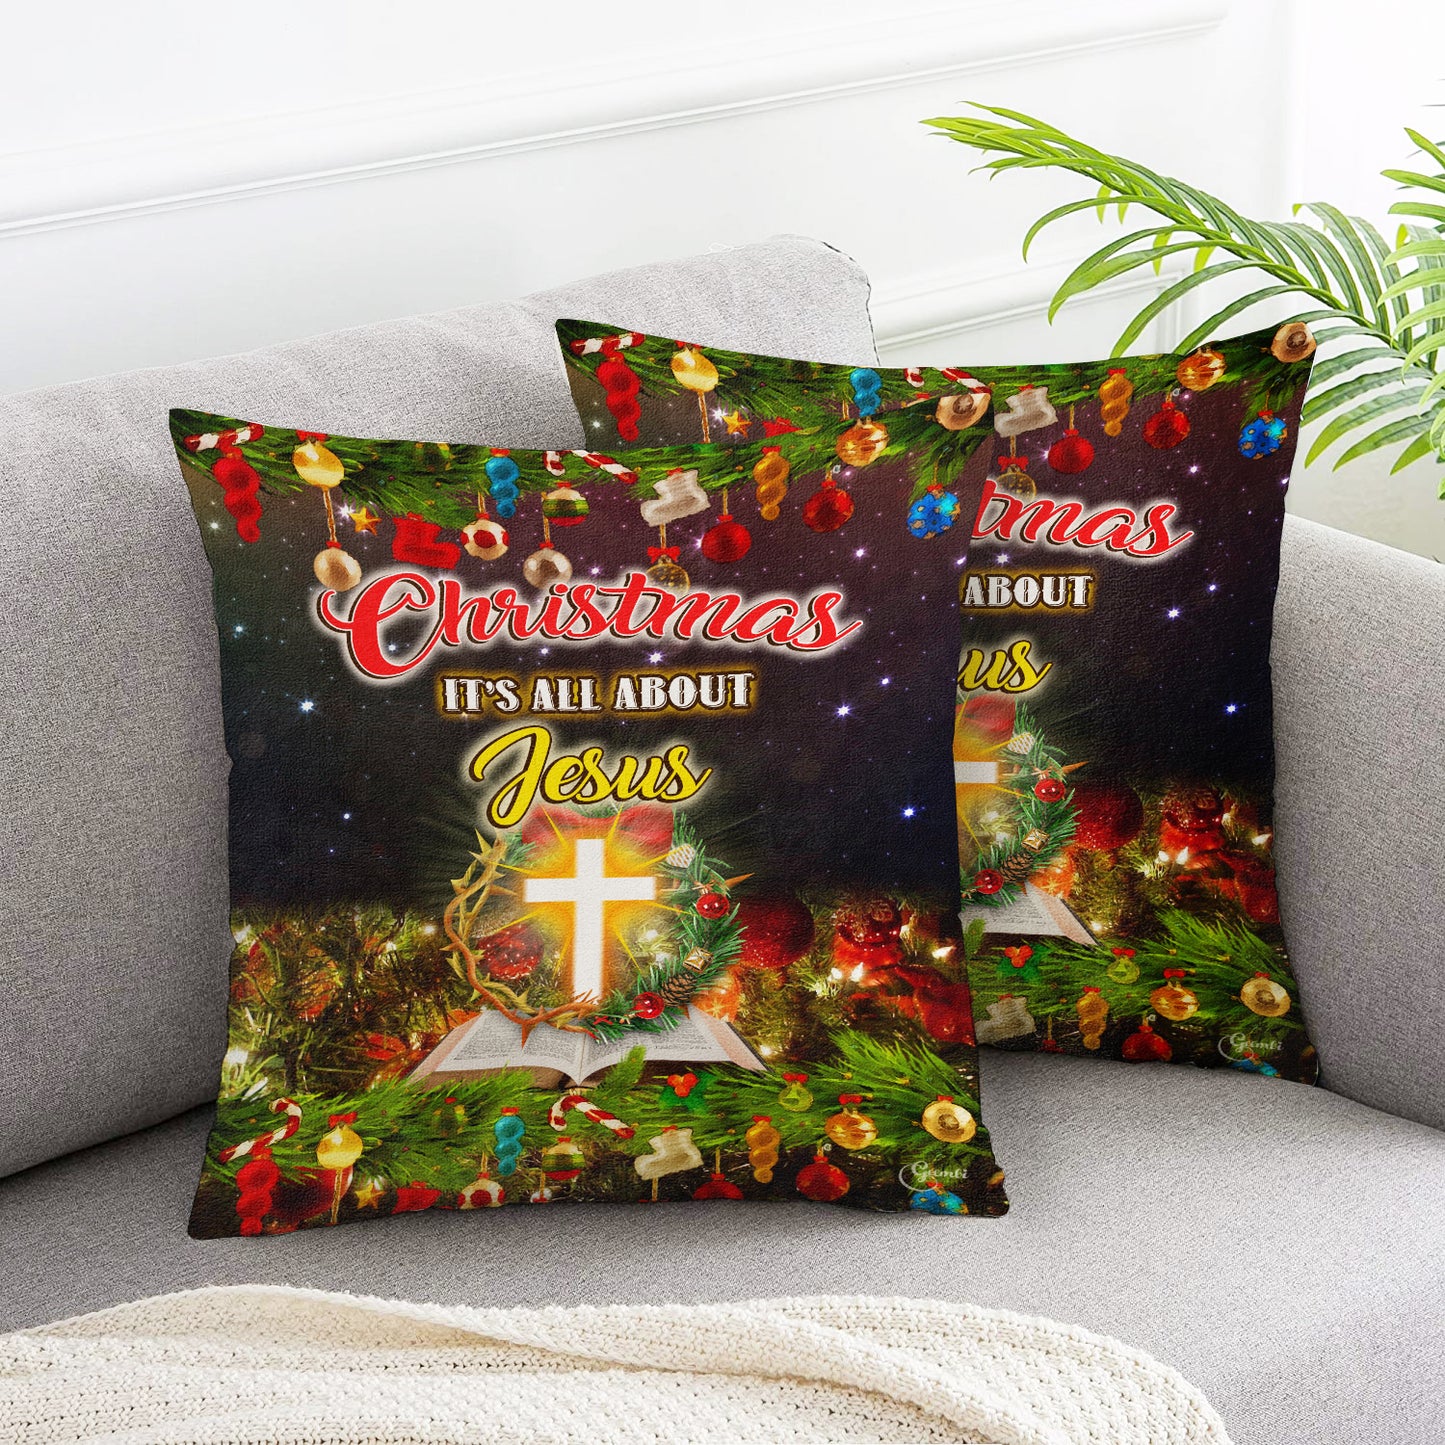 Christmas Is All About Jesus Throw Pillow Cover 2pcs